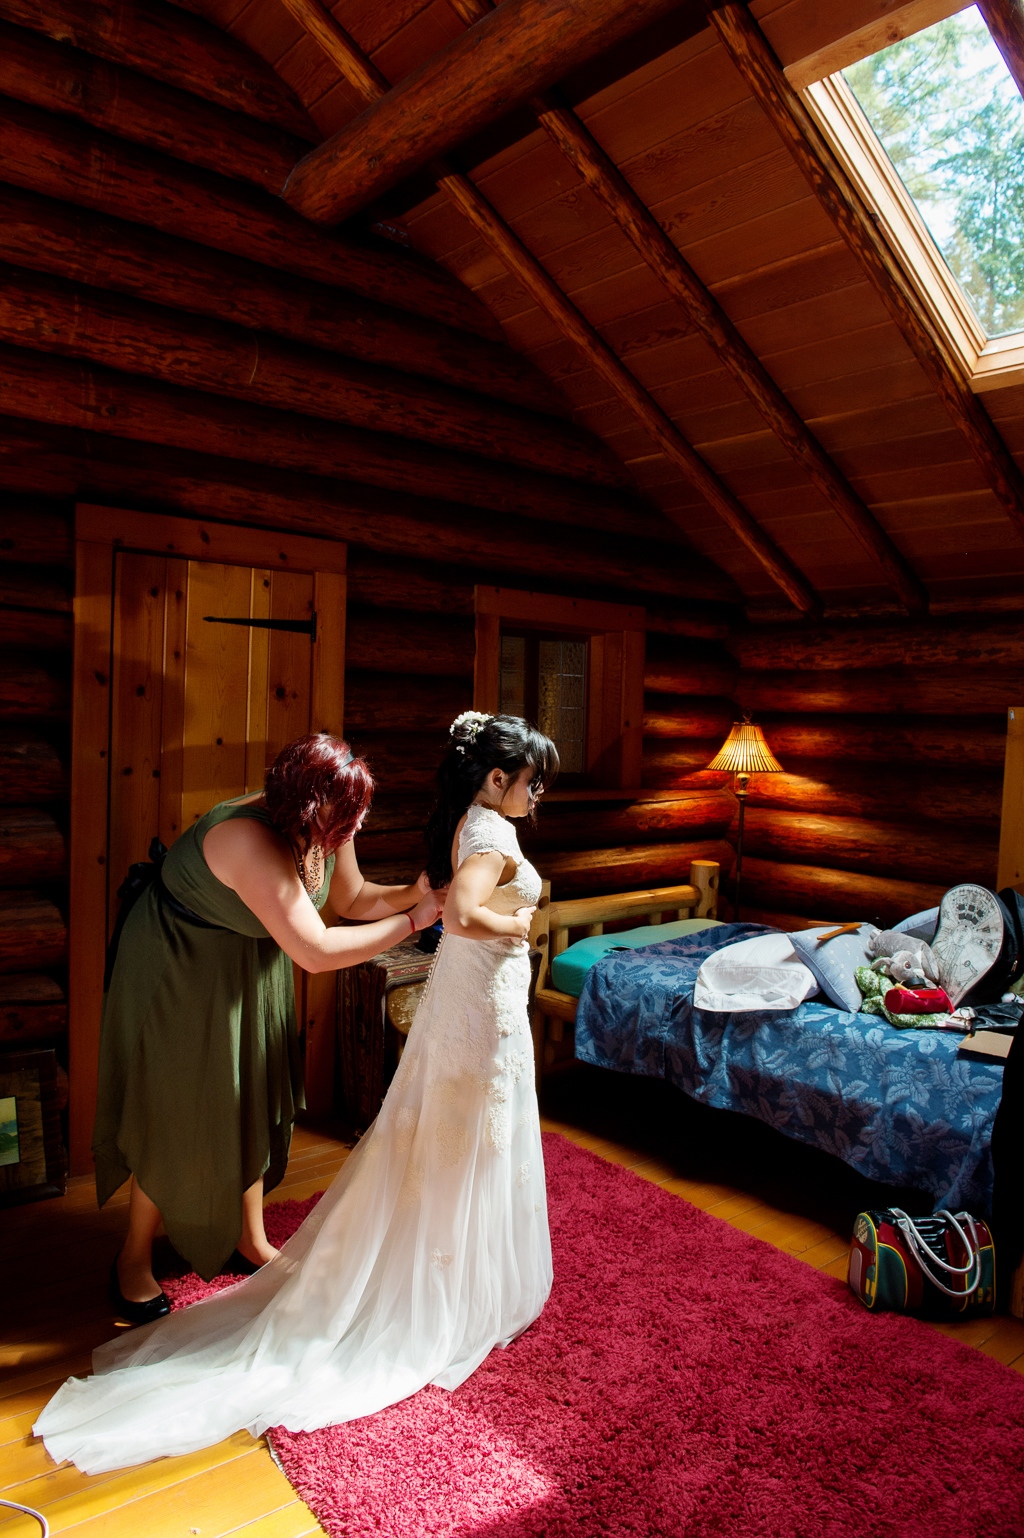 a bridesmaid helps a bride put on her wedding dress in a log cabin